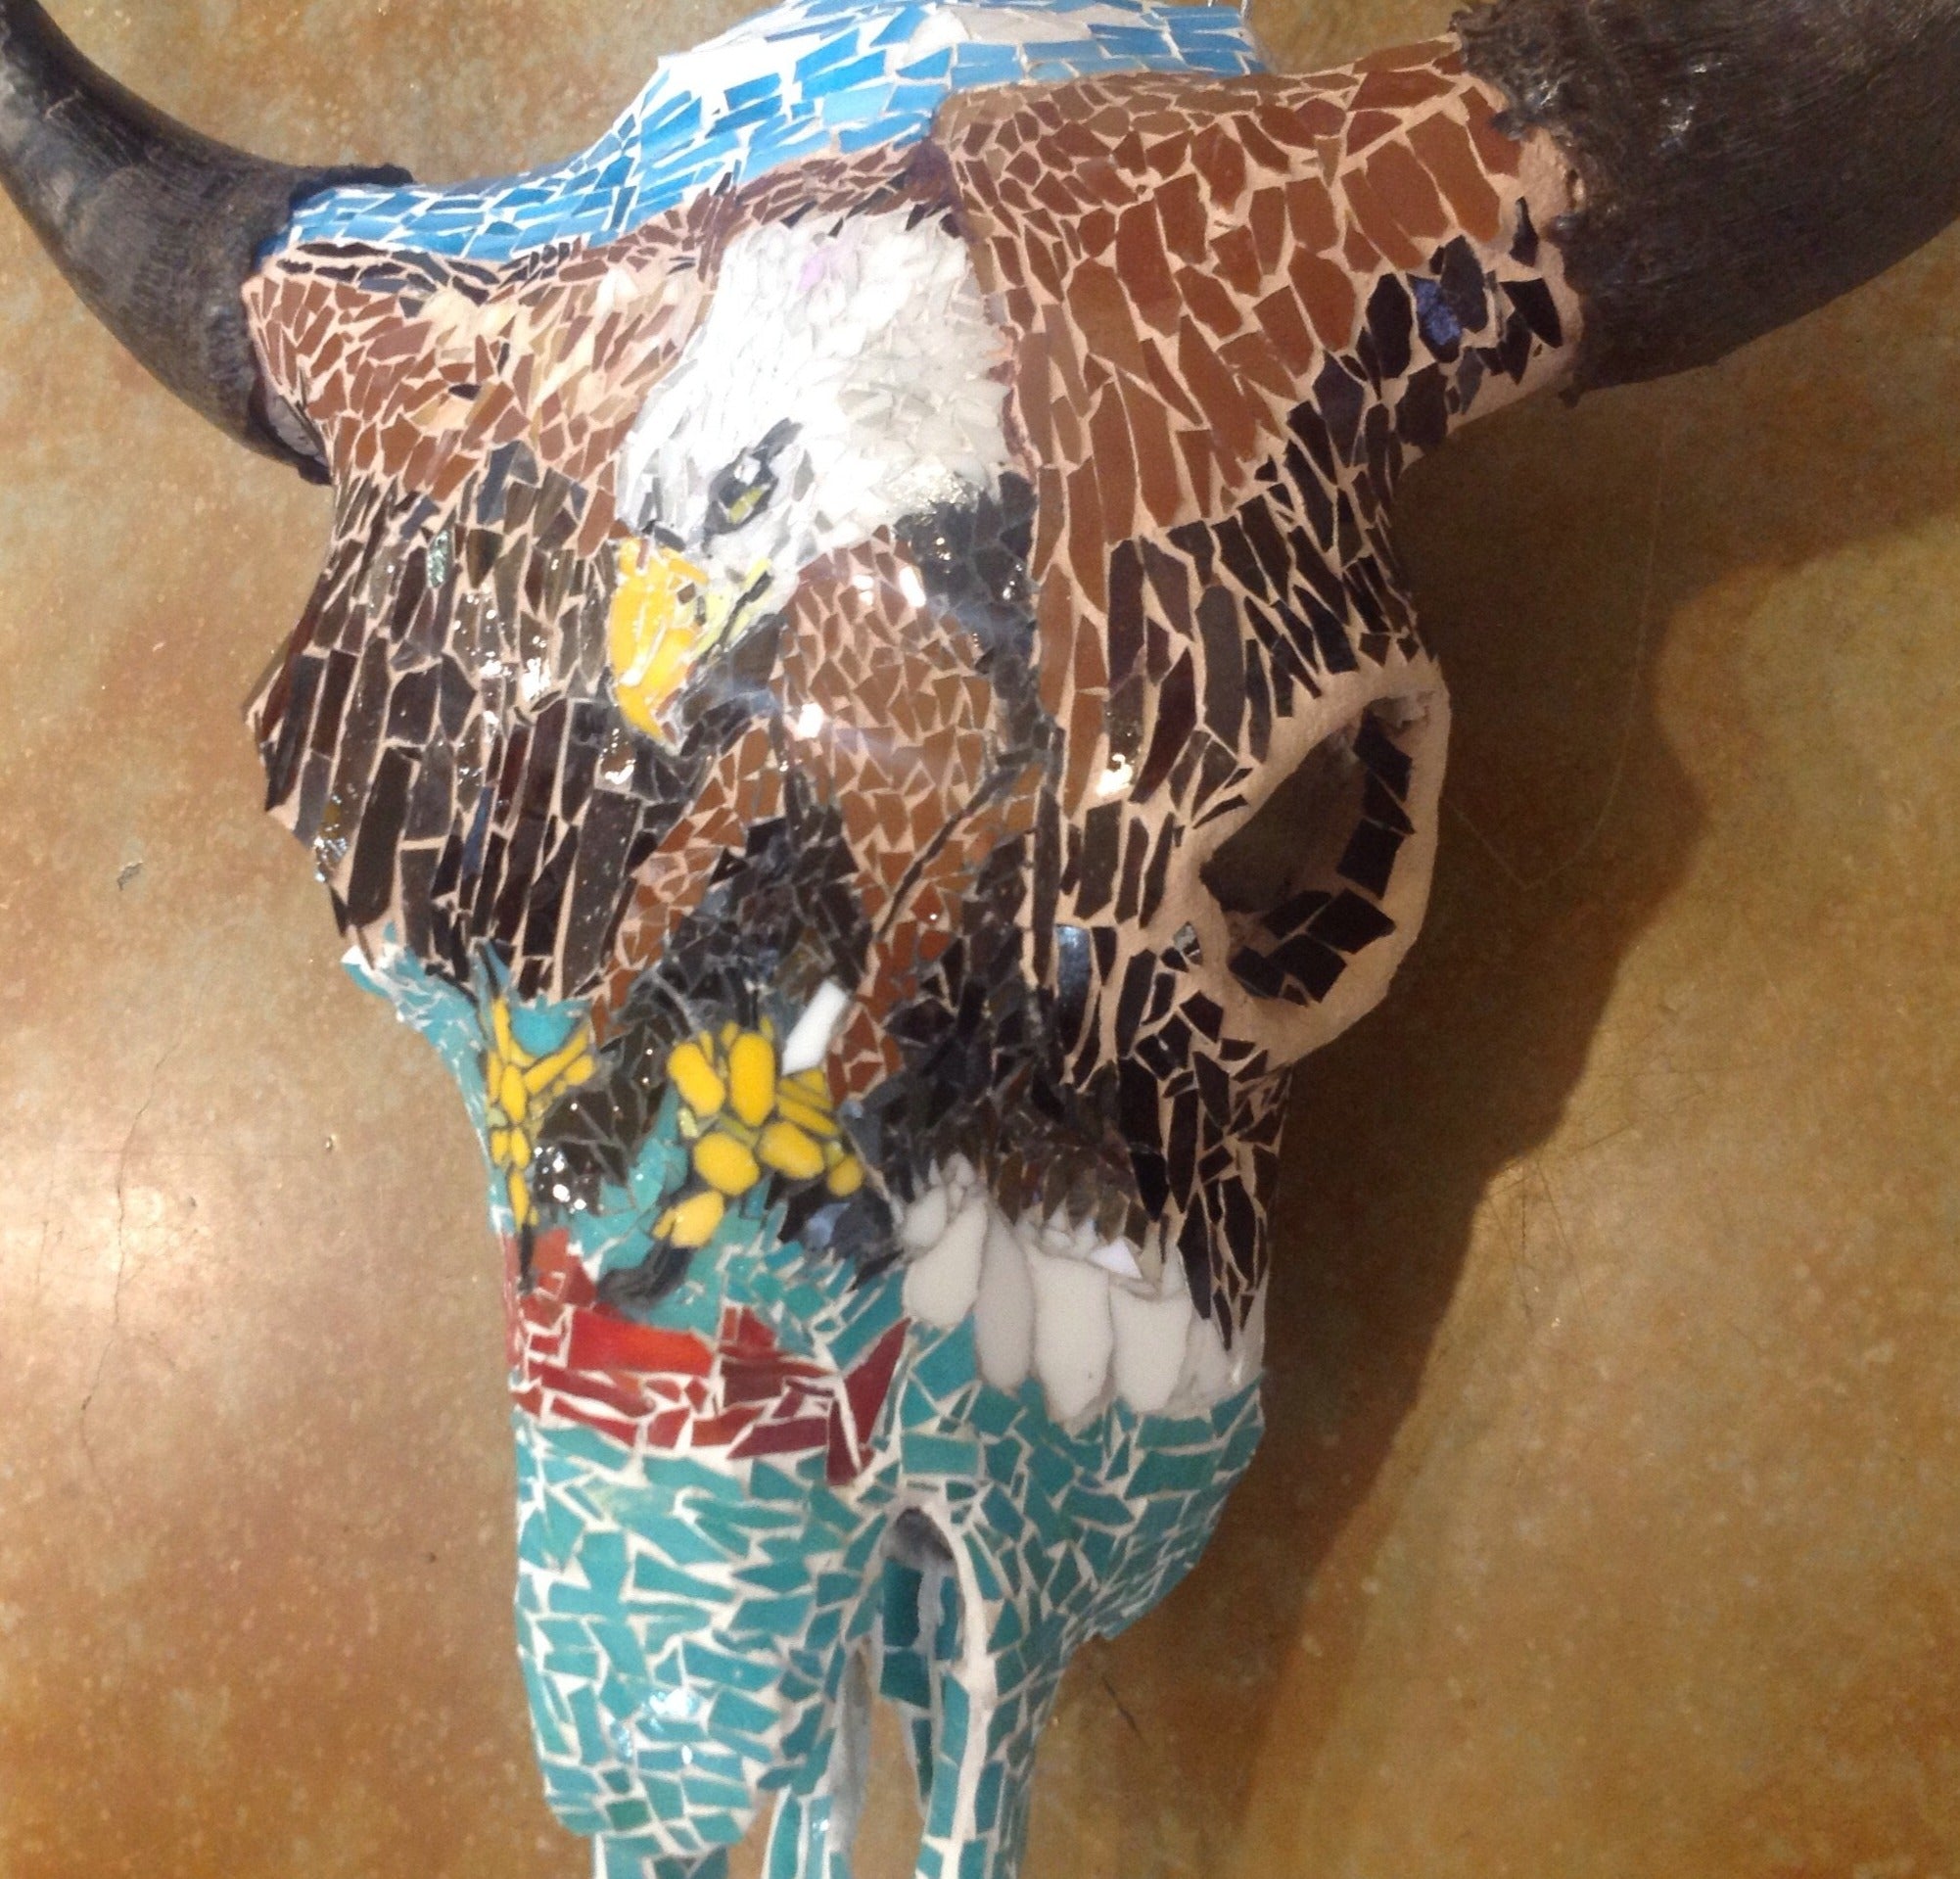 Mosaic clad bison skull - "The Way it is Suppose to be"